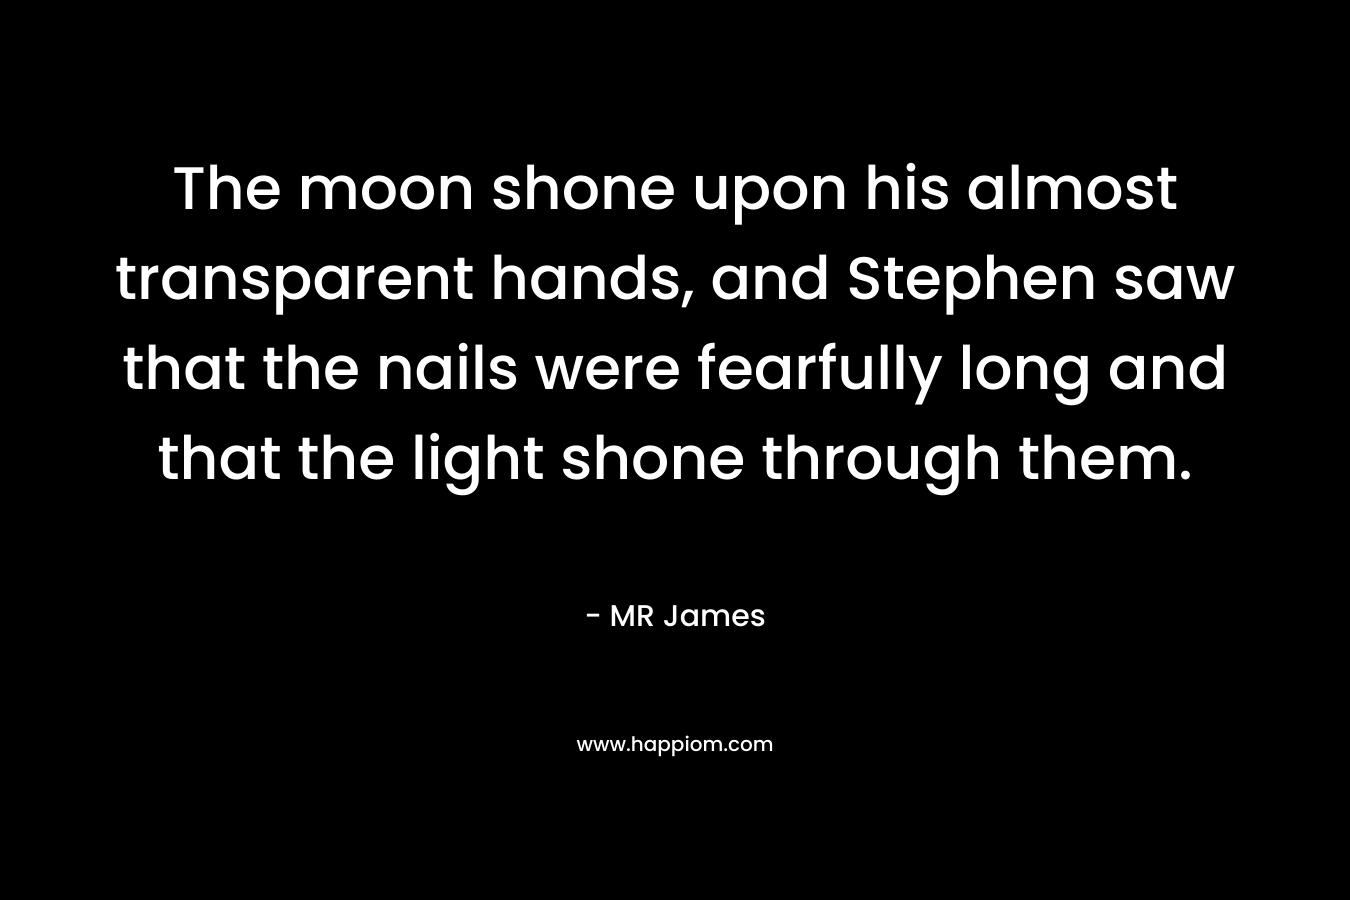 The moon shone upon his almost transparent hands, and Stephen saw that the nails were fearfully long and that the light shone through them.